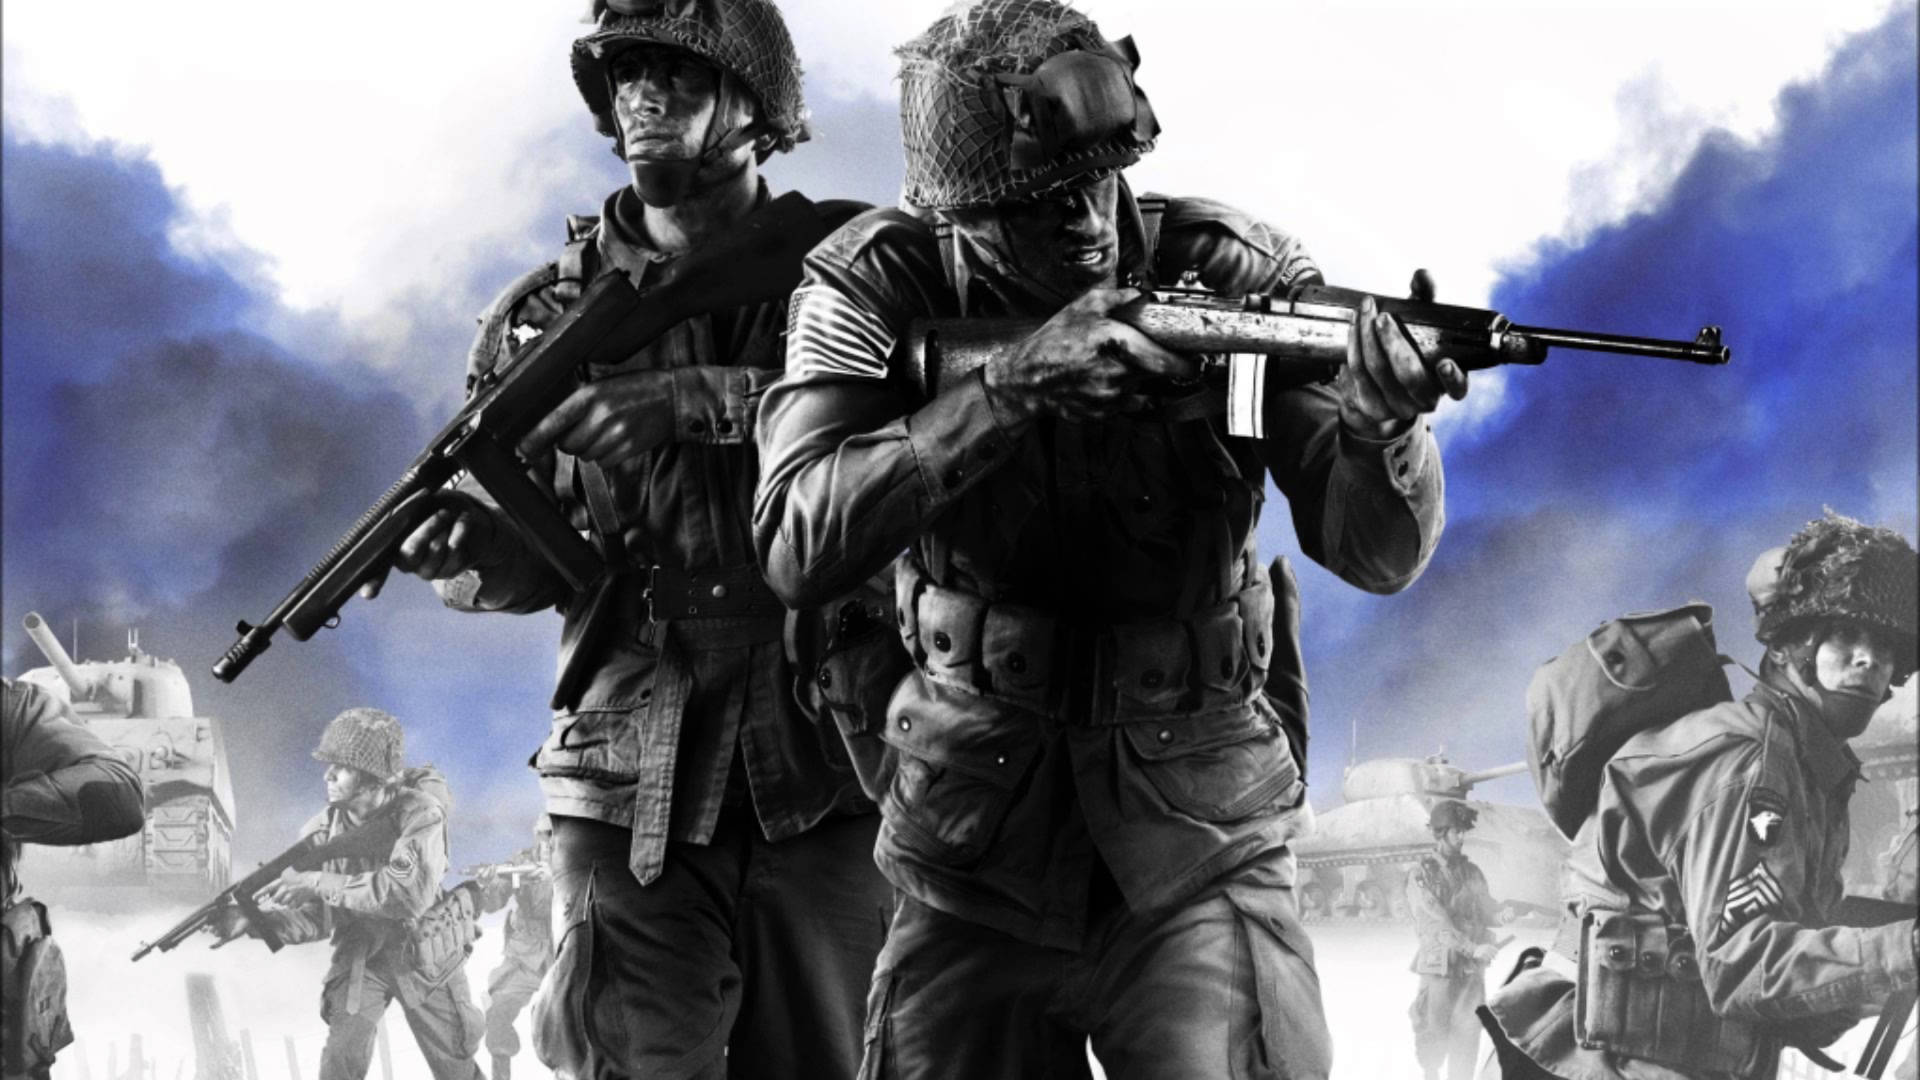 Company of Heroes 2 Grayscale Soldiers Wallpaper